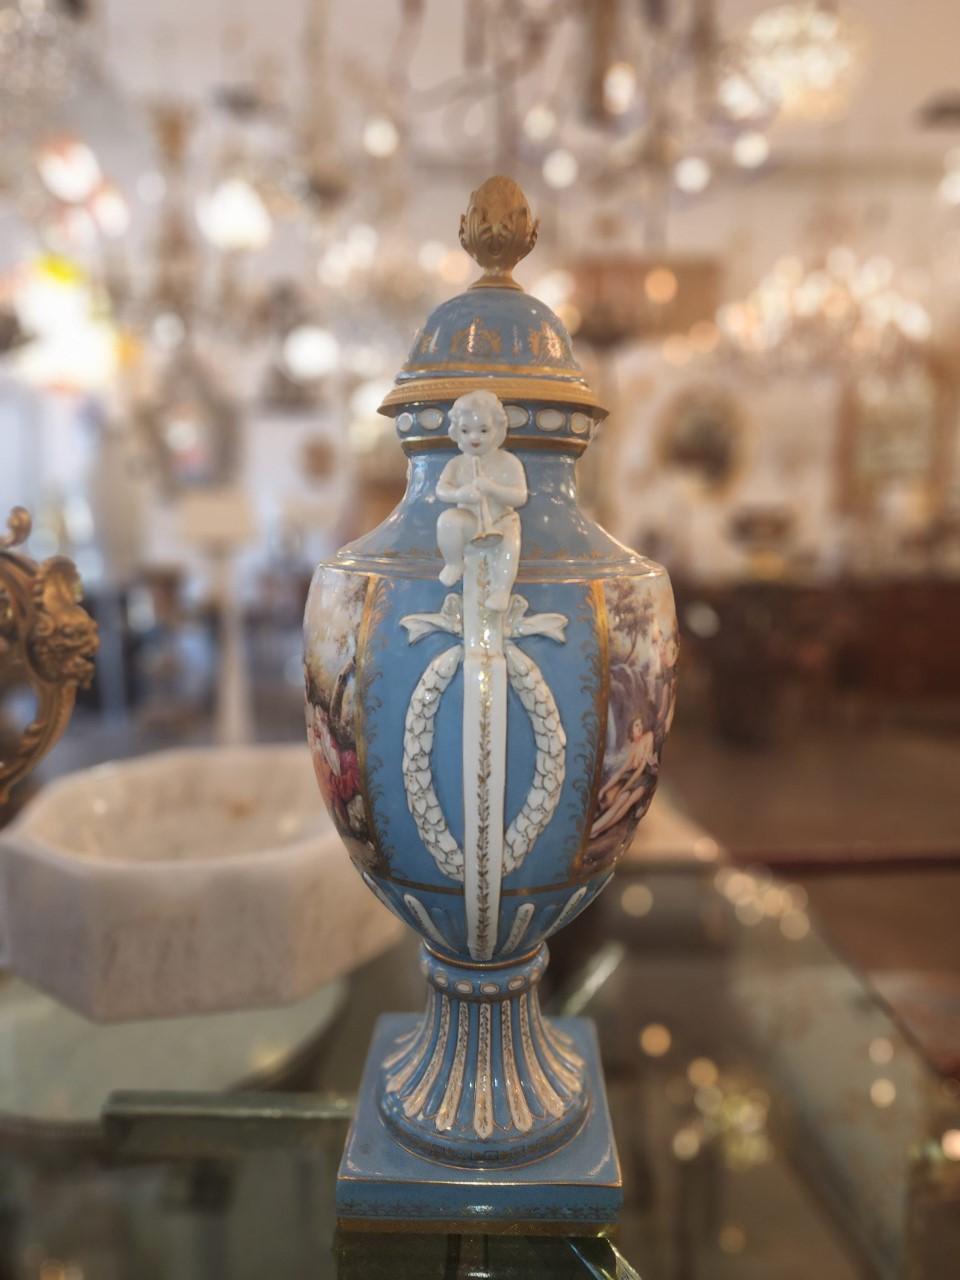 Pair of Stunning 19th Century French porcelain urns. In perfect condition. In the Baroque style. Perfect for entry way accents.